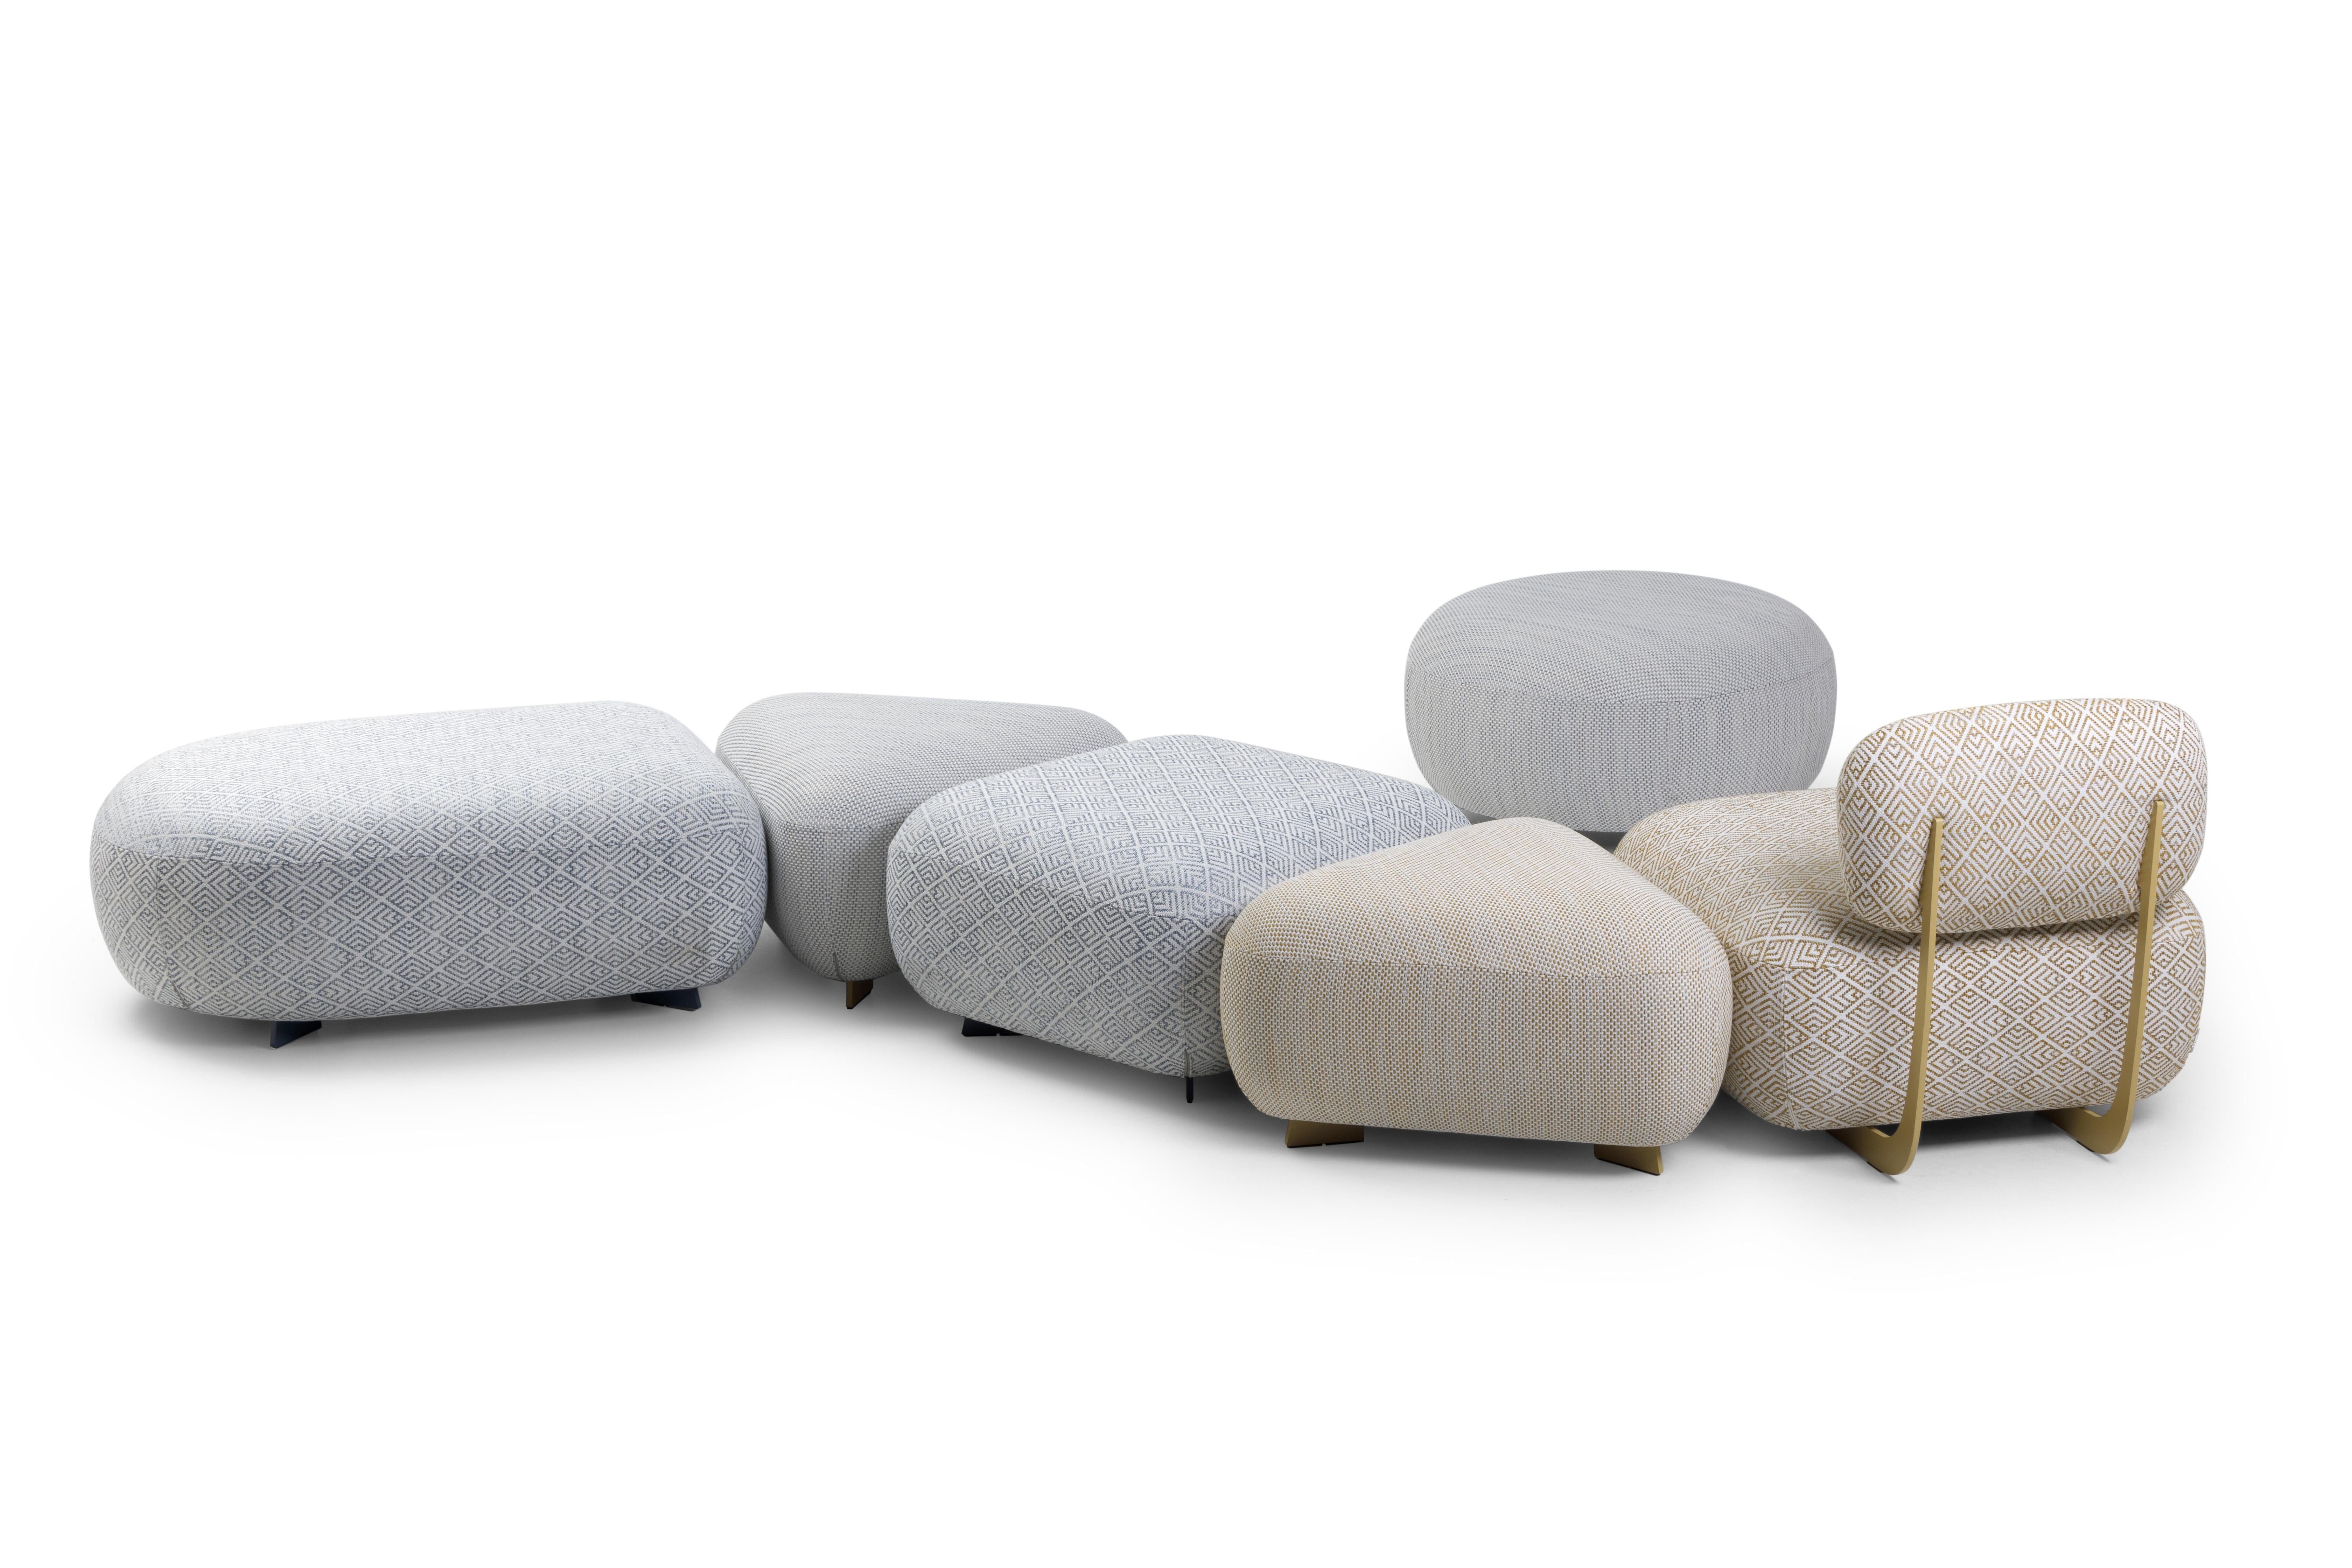 A comfortable, flexible and modular seating system perfectly suited to any outdoor space thanks to the infinite syntactic possibilities. Code Out identifies an aesthetic-formal language of simple geometric signs, which compose an alphabet of